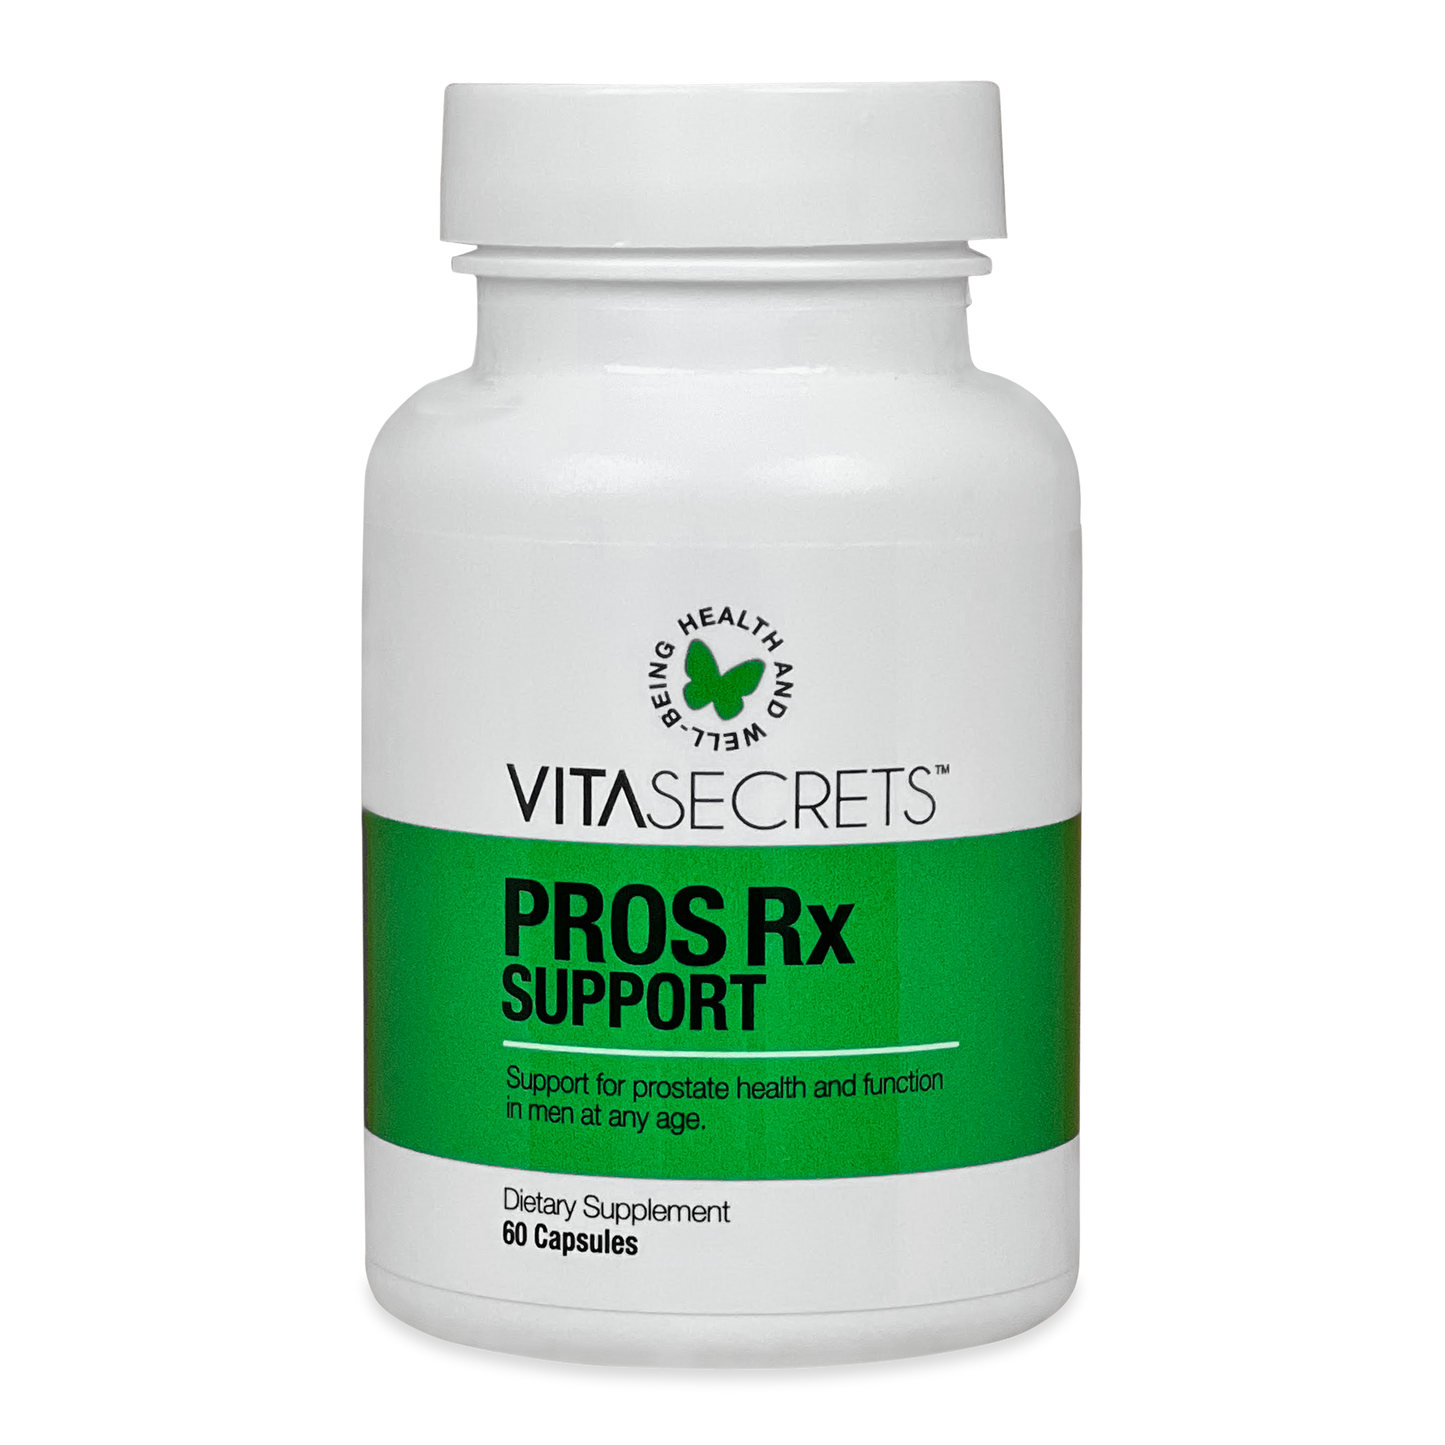 Pros Rx Support (Prostate health & function support)